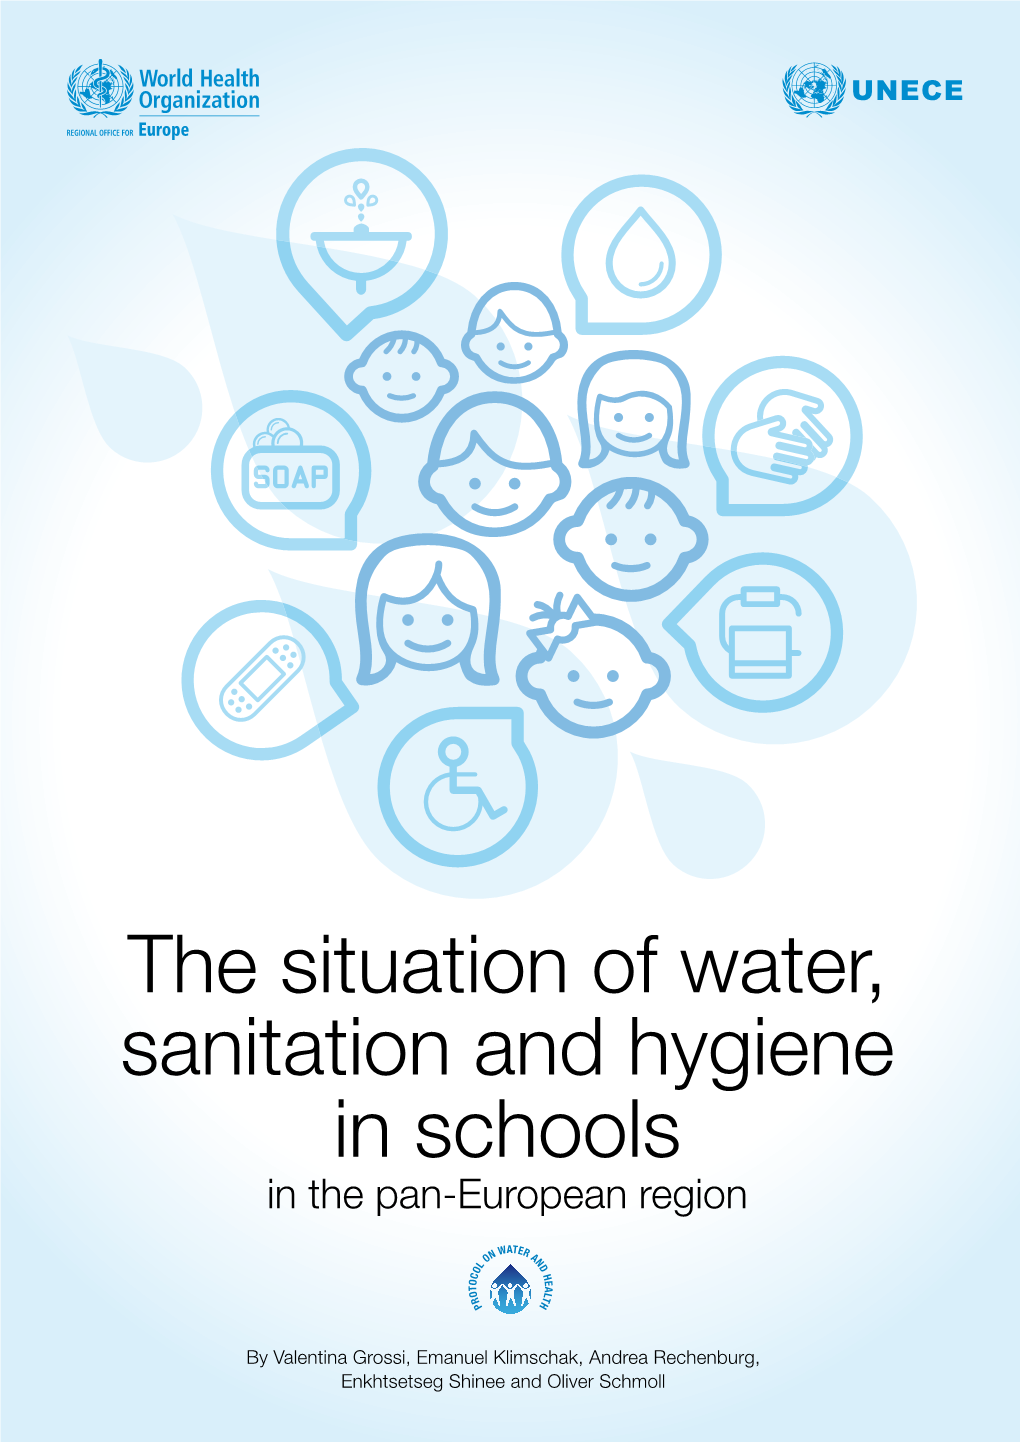 The Situation of Water, Sanitation and Hygiene in Schools in the Pan-European Region